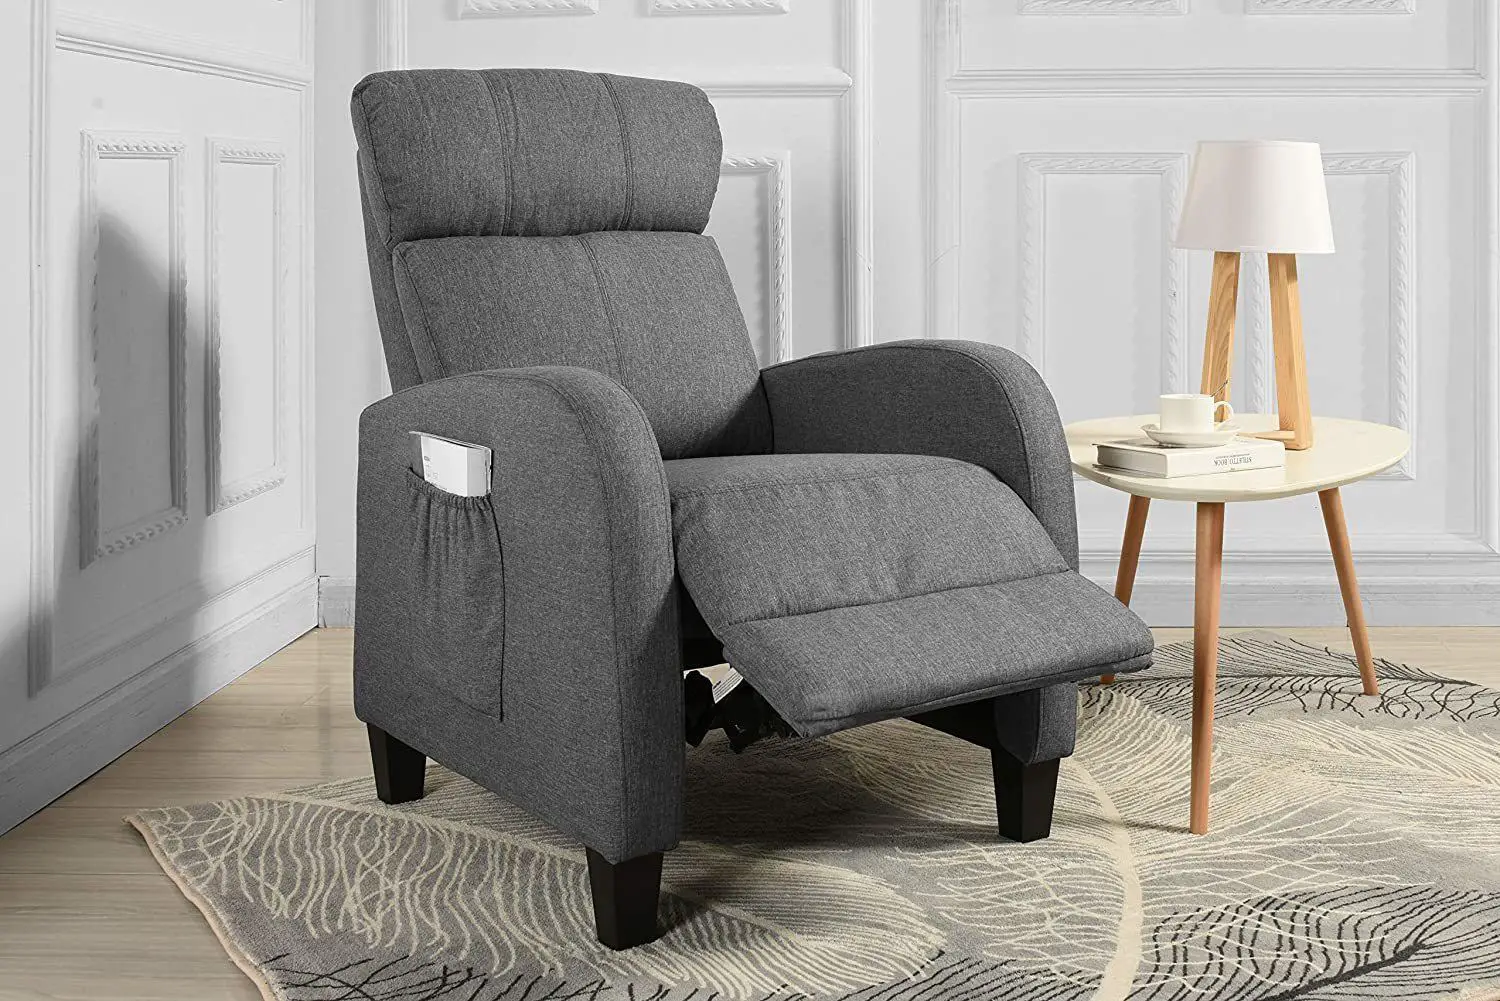 Best Living Room Chairs For Comfort